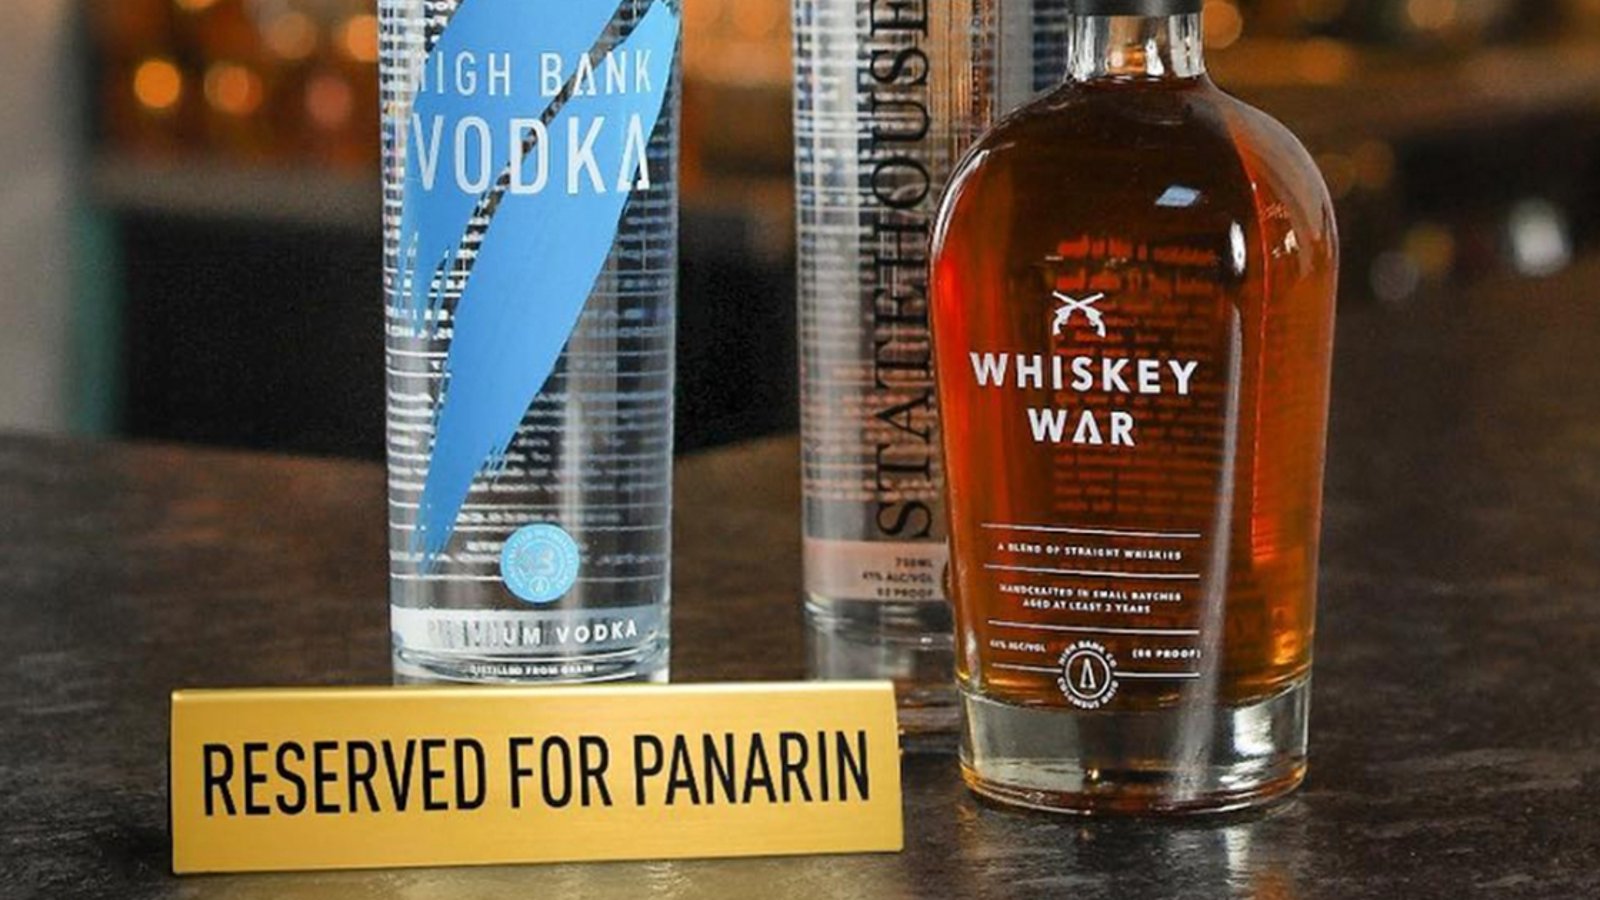 Panarin responds to “free vodka for life” offer in Columbus